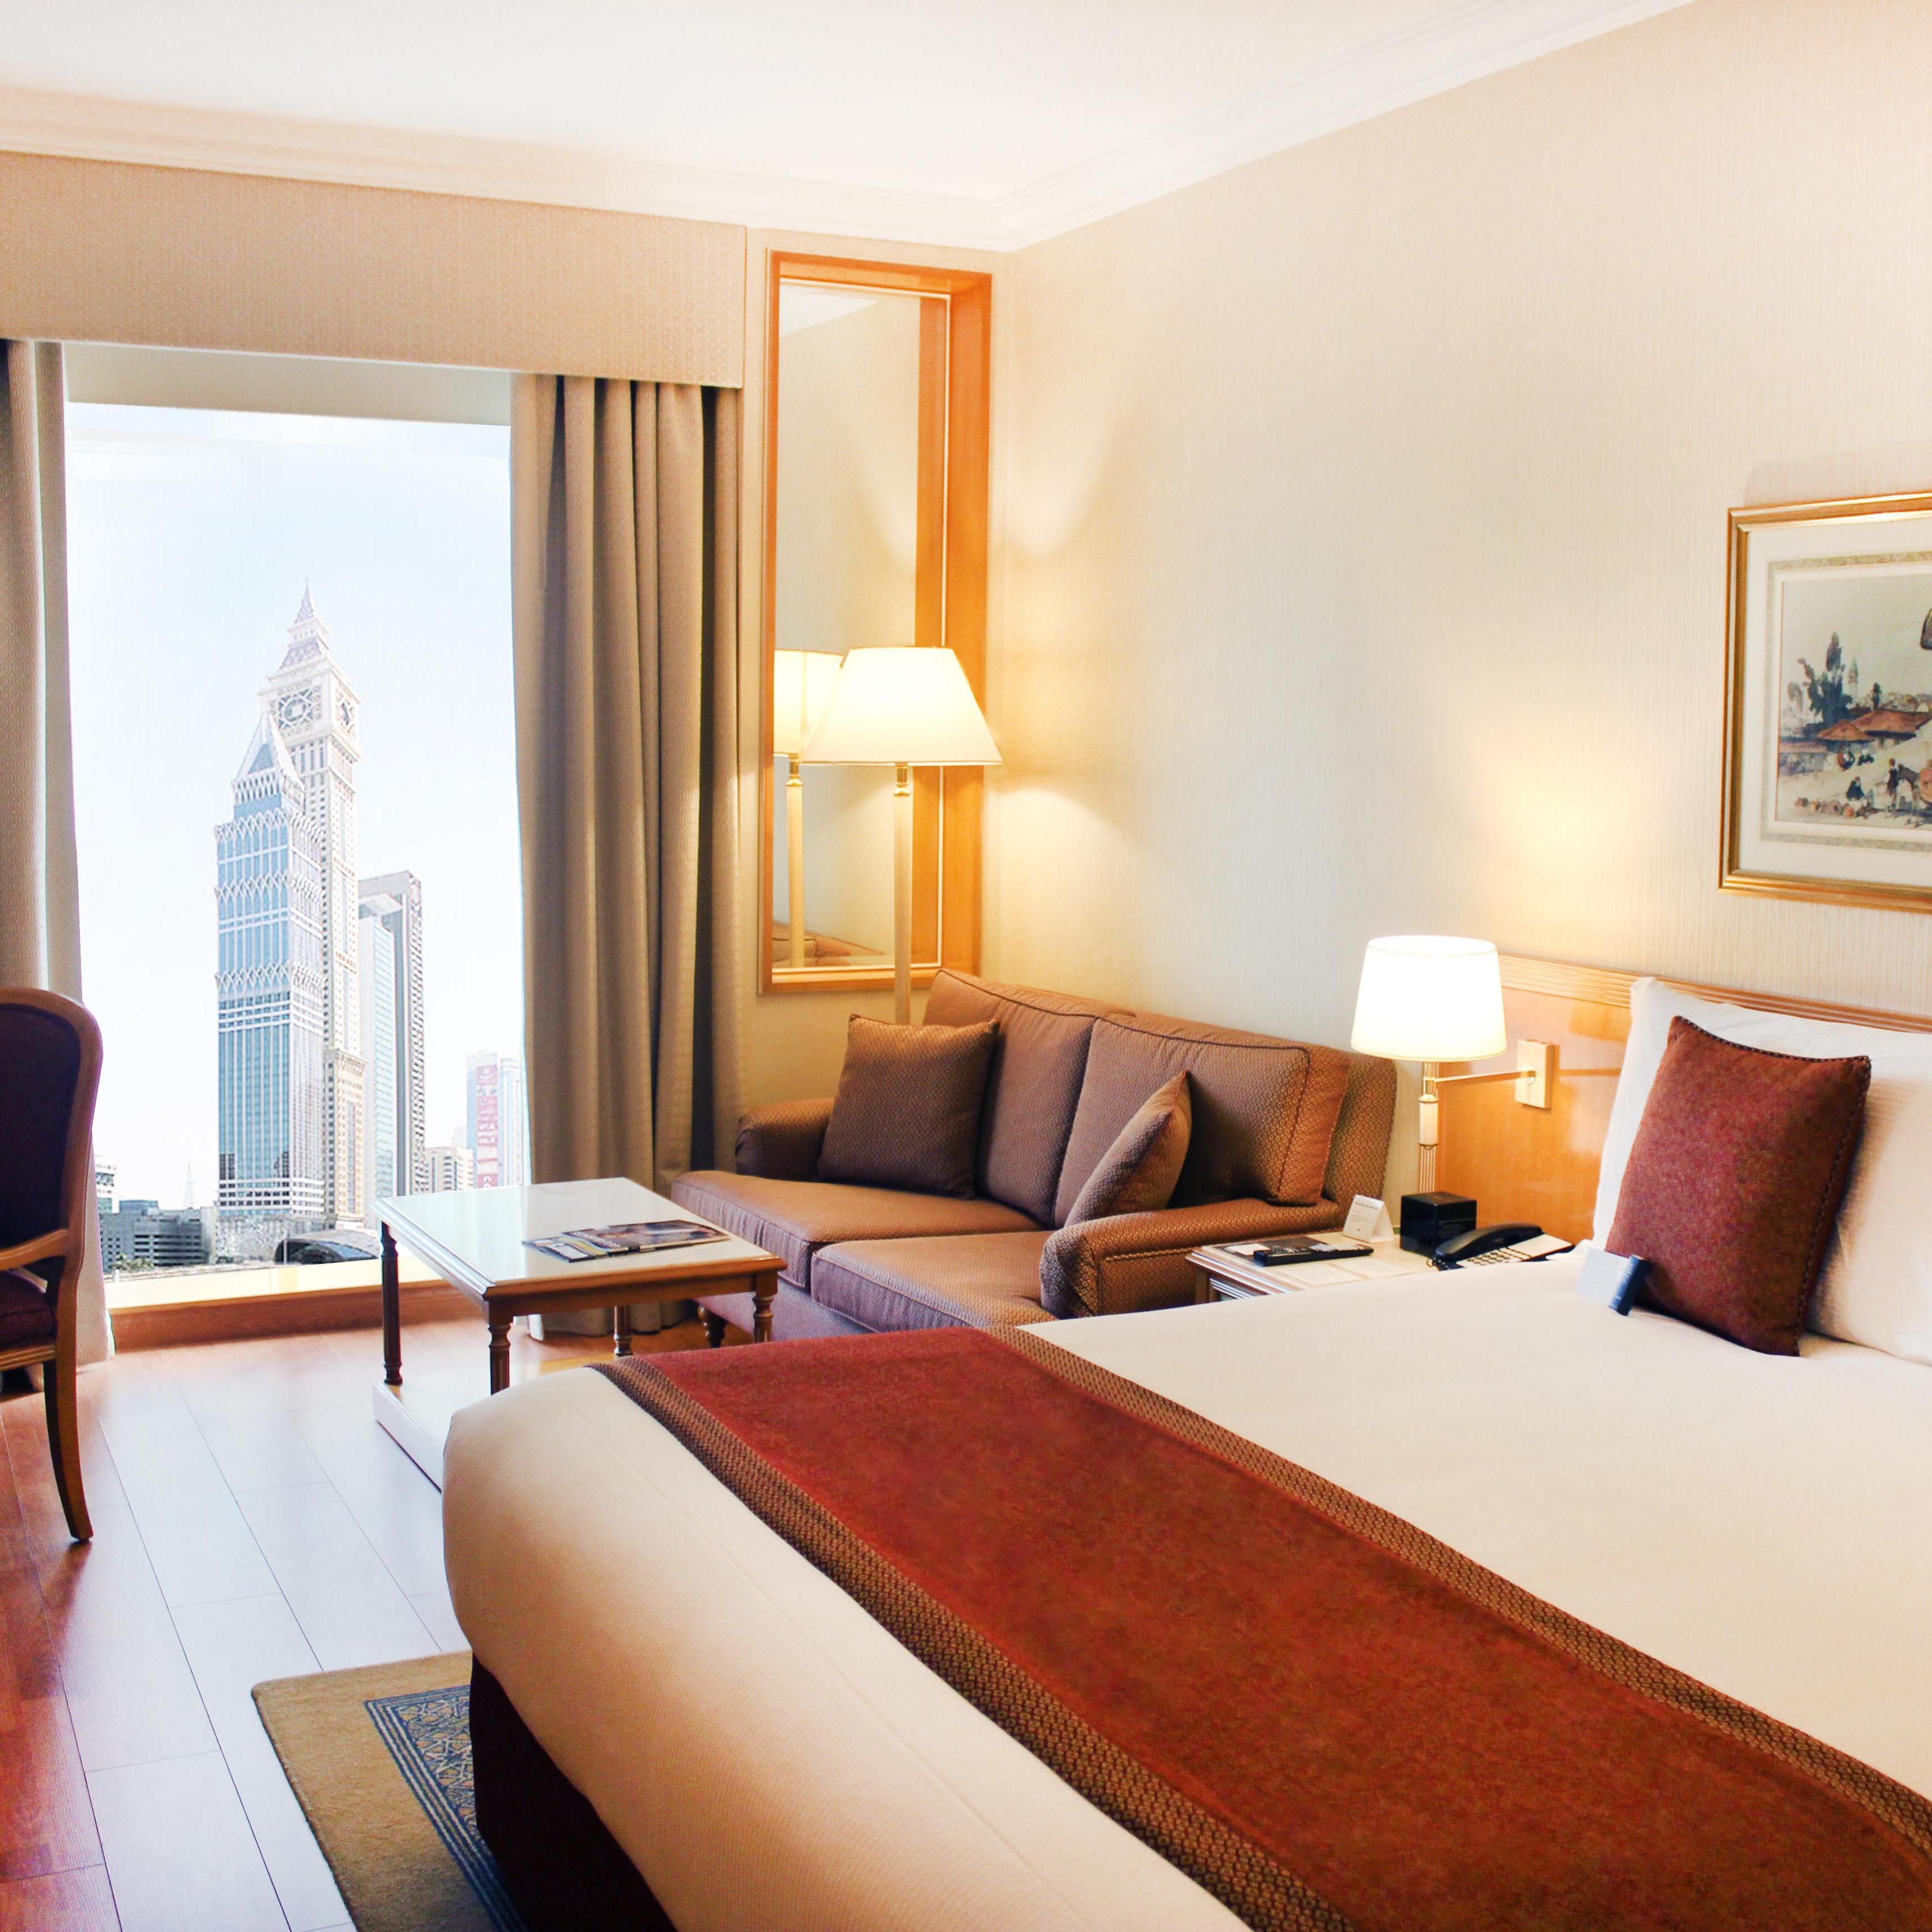 Business guests will find the Deluxe Room suited to their need